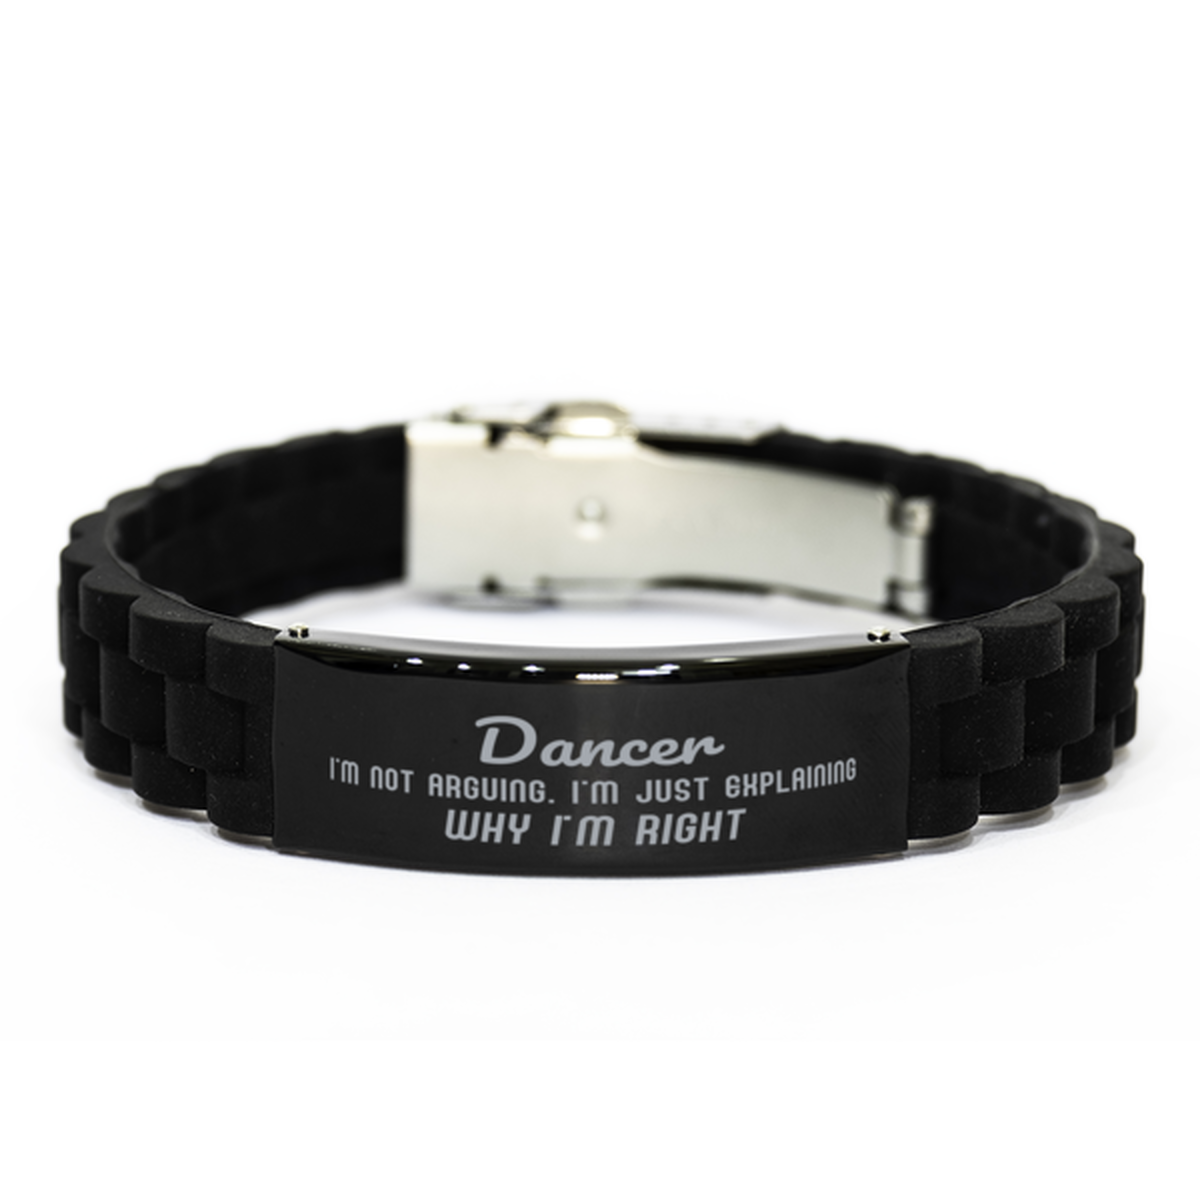 Dancer I'm not Arguing. I'm Just Explaining Why I'm RIGHT Black Glidelock Clasp Bracelet, Funny Saying Quote Dancer Gifts For Dancer Graduation Birthday Christmas Gifts for Men Women Coworker